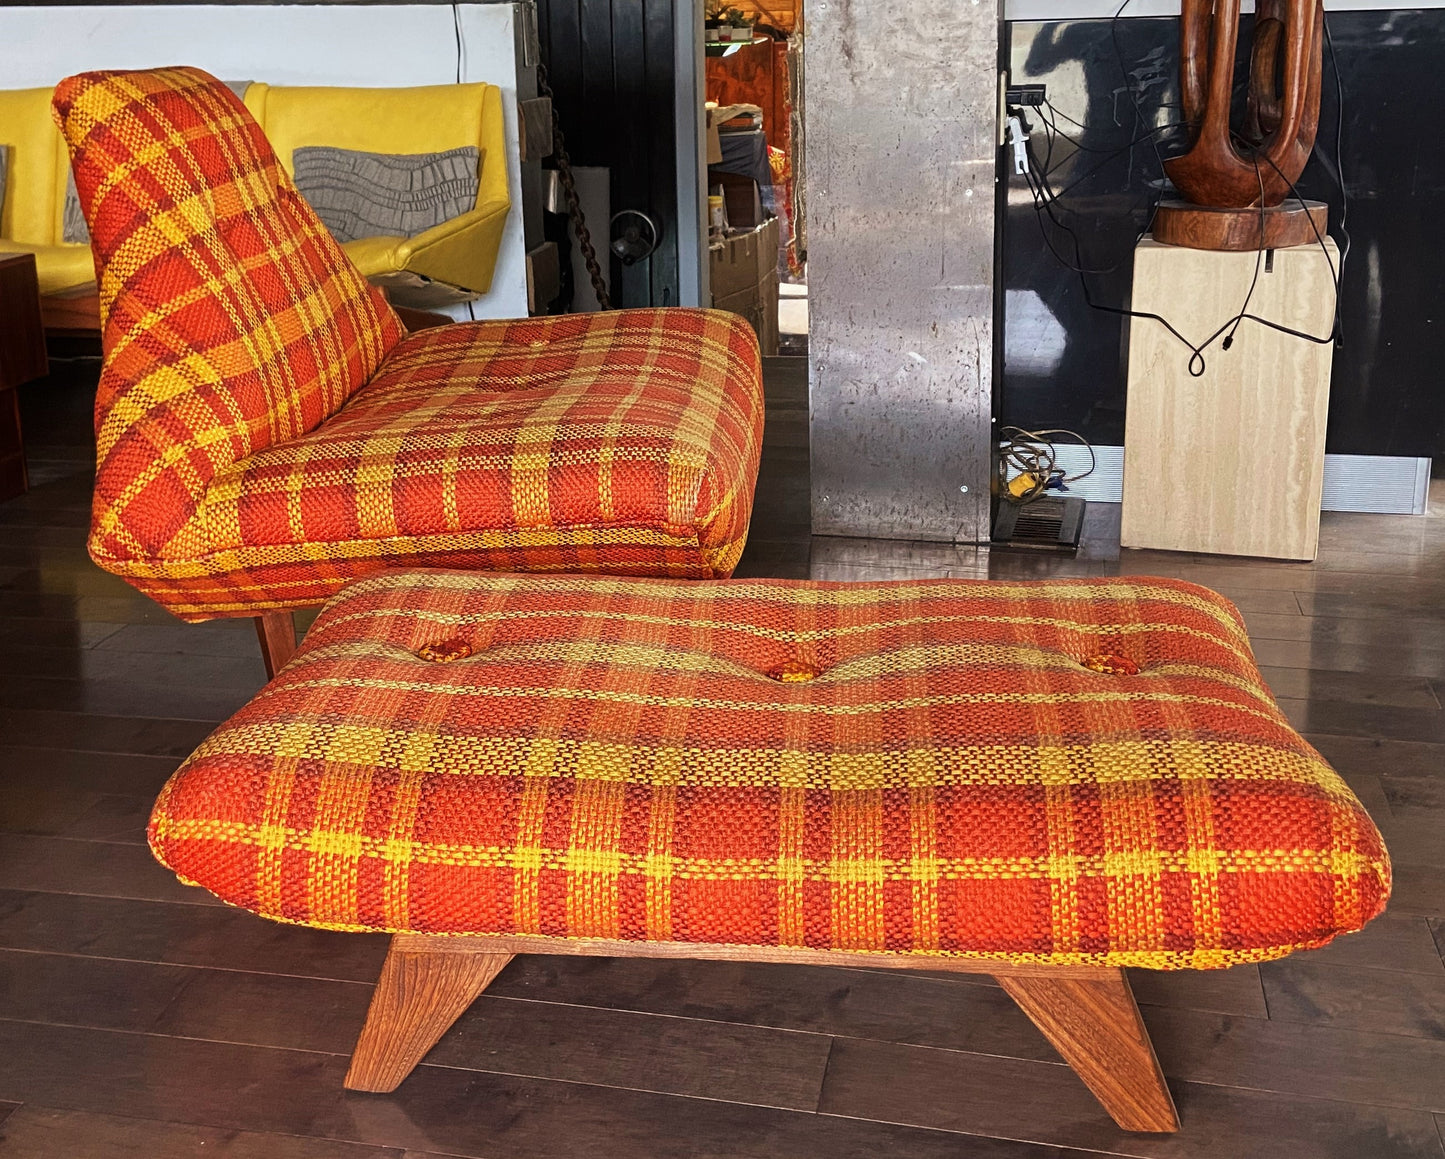 RESTORED MCM Large Lounge Chair & Ottoman in Adrian Pearsall style